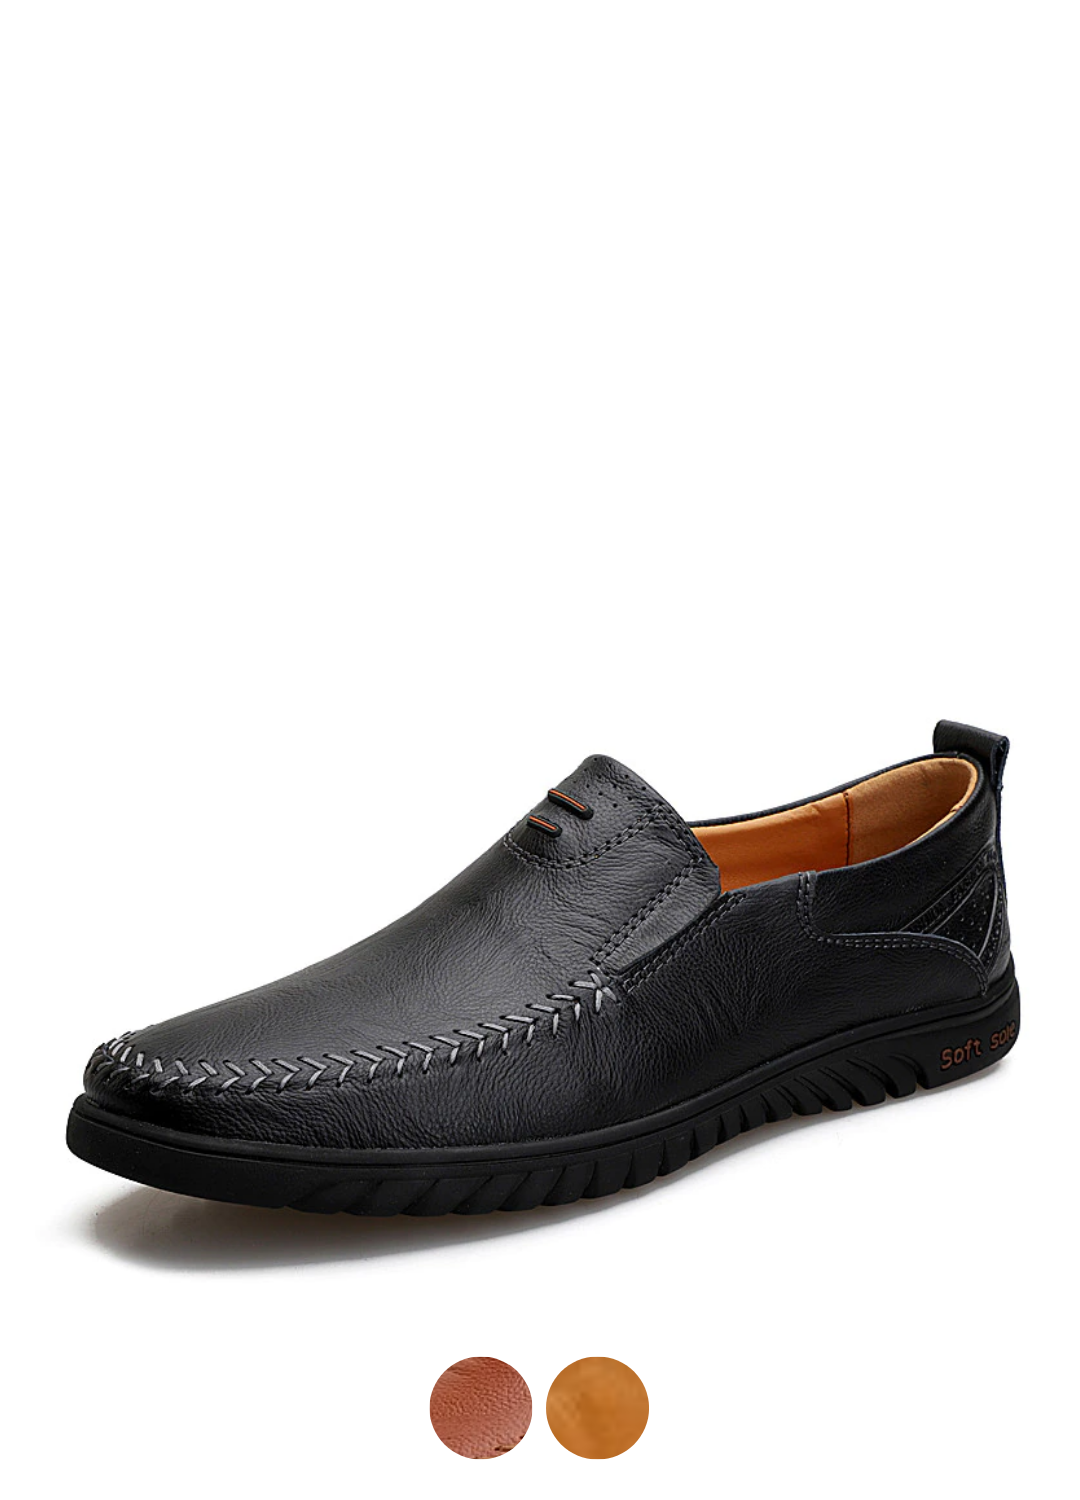 Wyatt Men's Loafers Casual Shoes | Ultrasellershoes.com – USS® Shoes